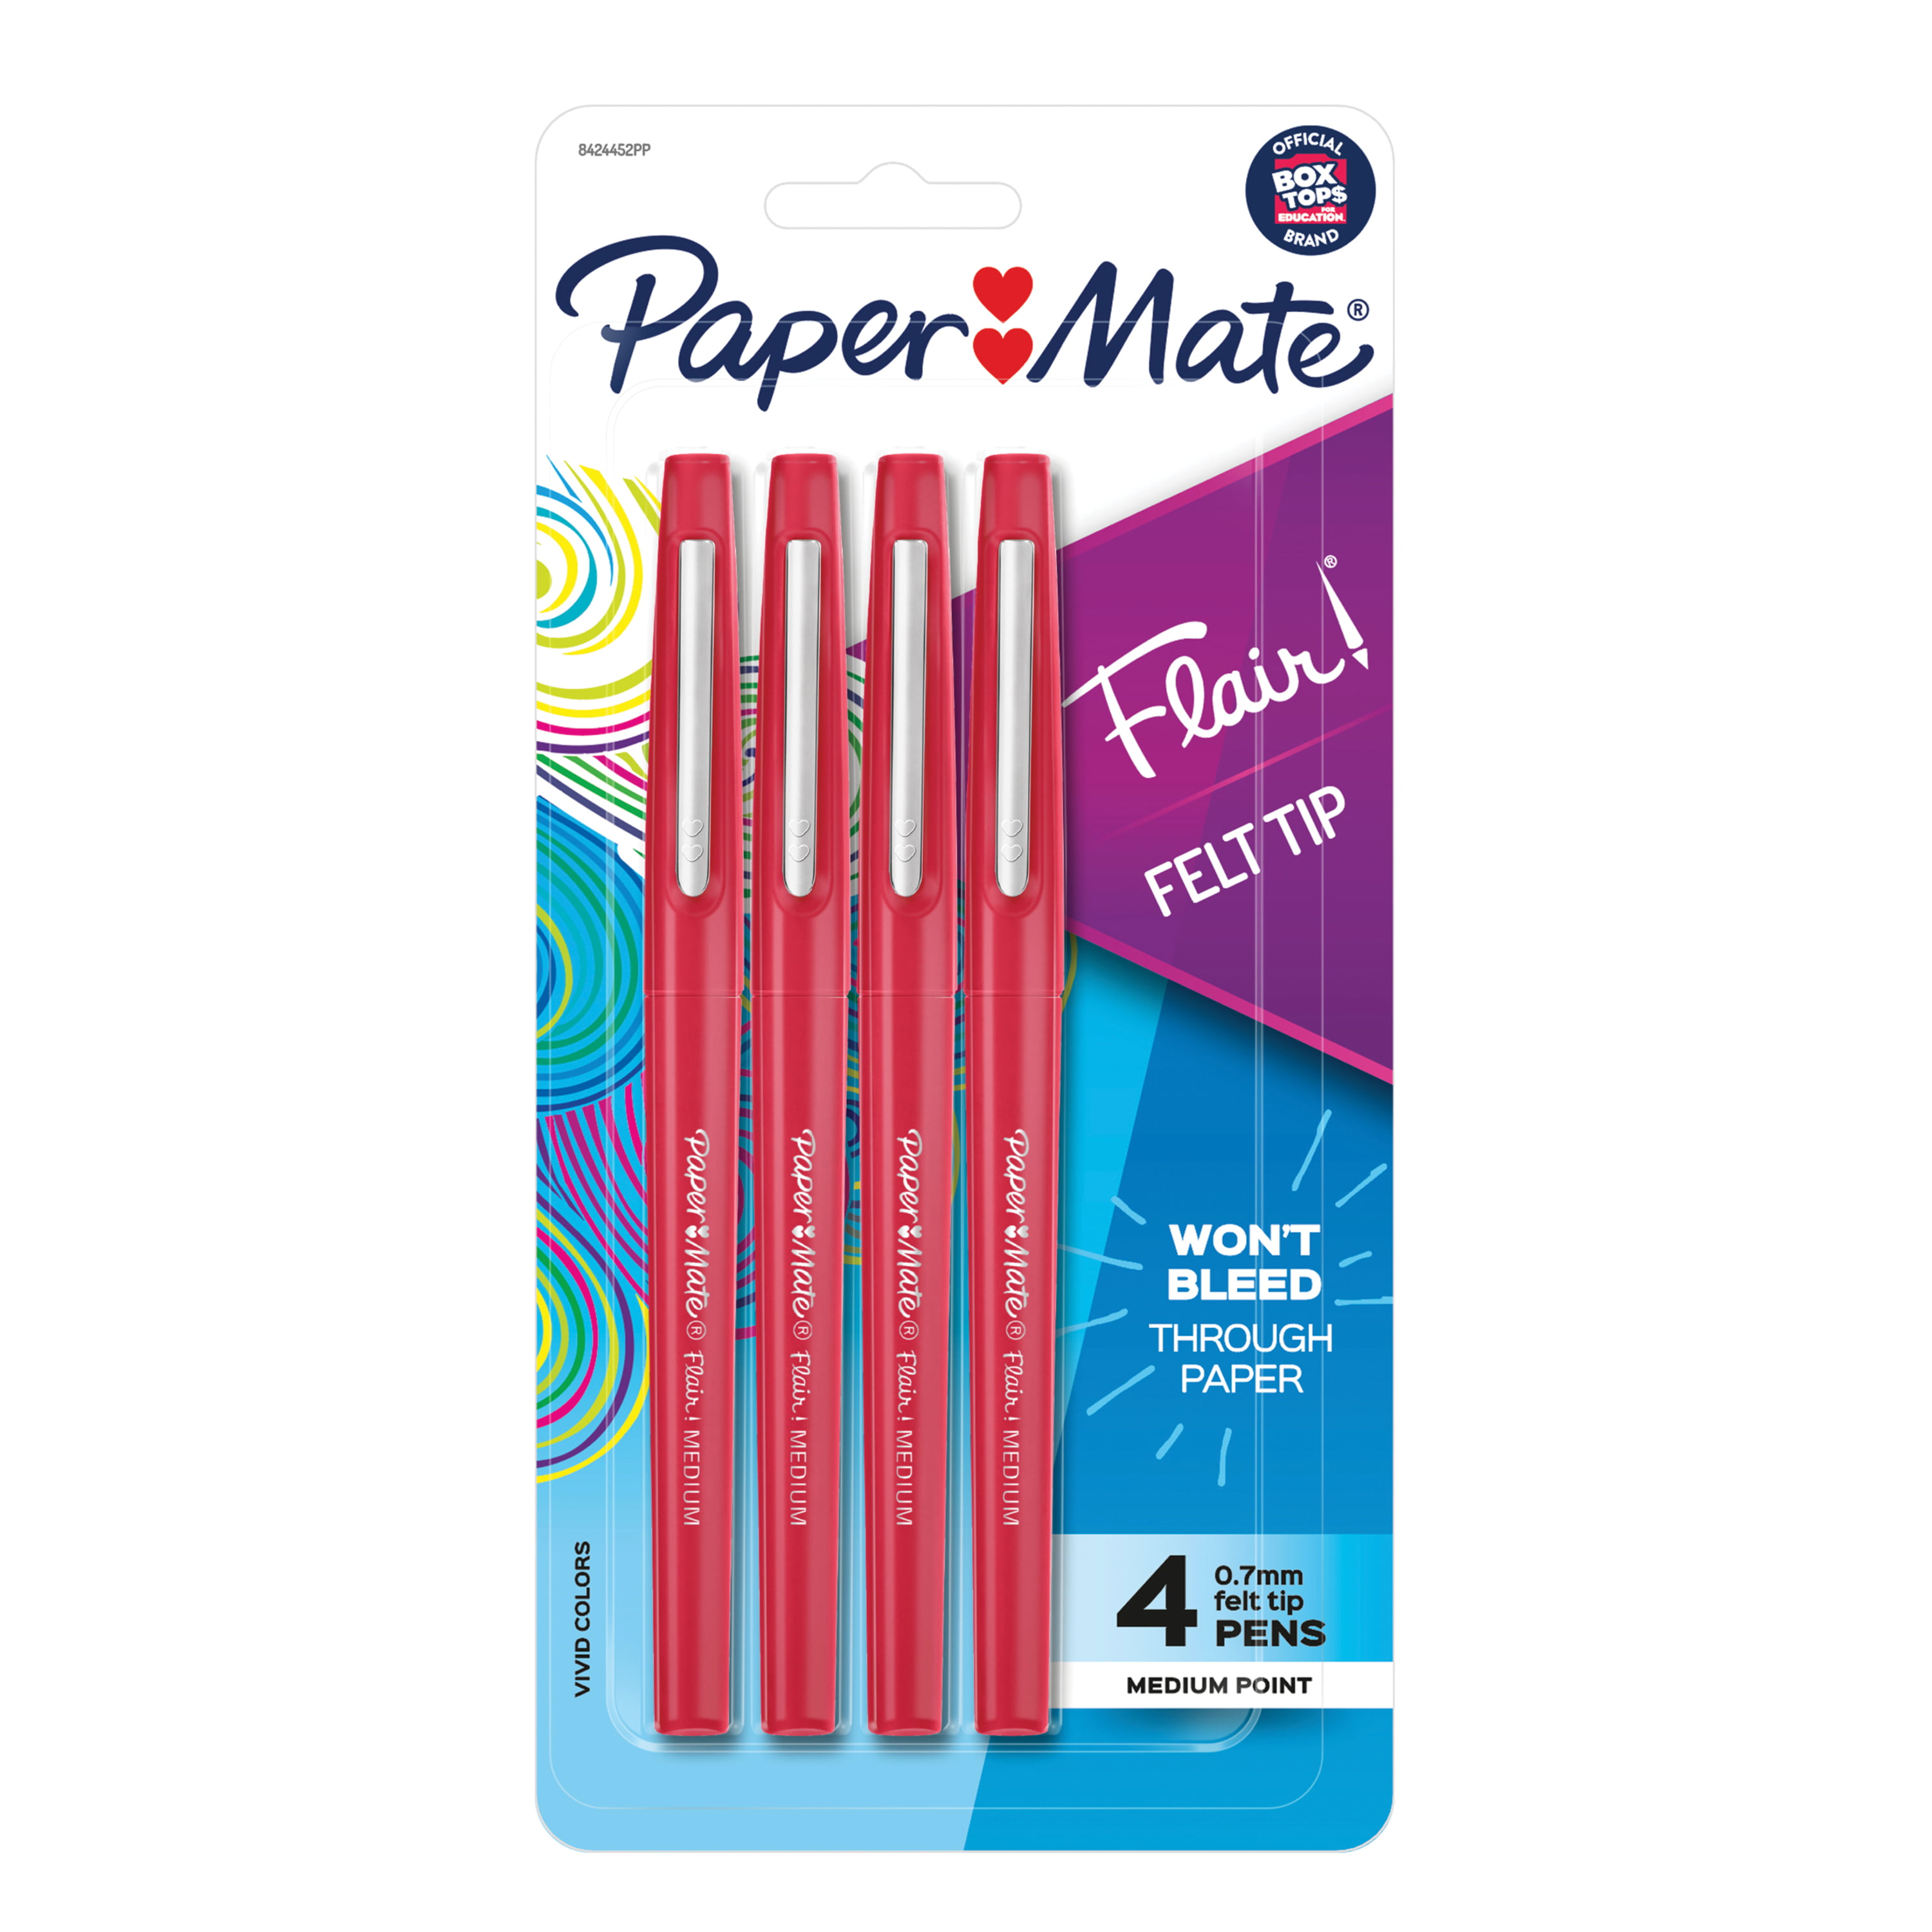 80s Vintage Paper Mate Flair Red Felt Tip Pen With Point Guard Carded NOS for sale online 